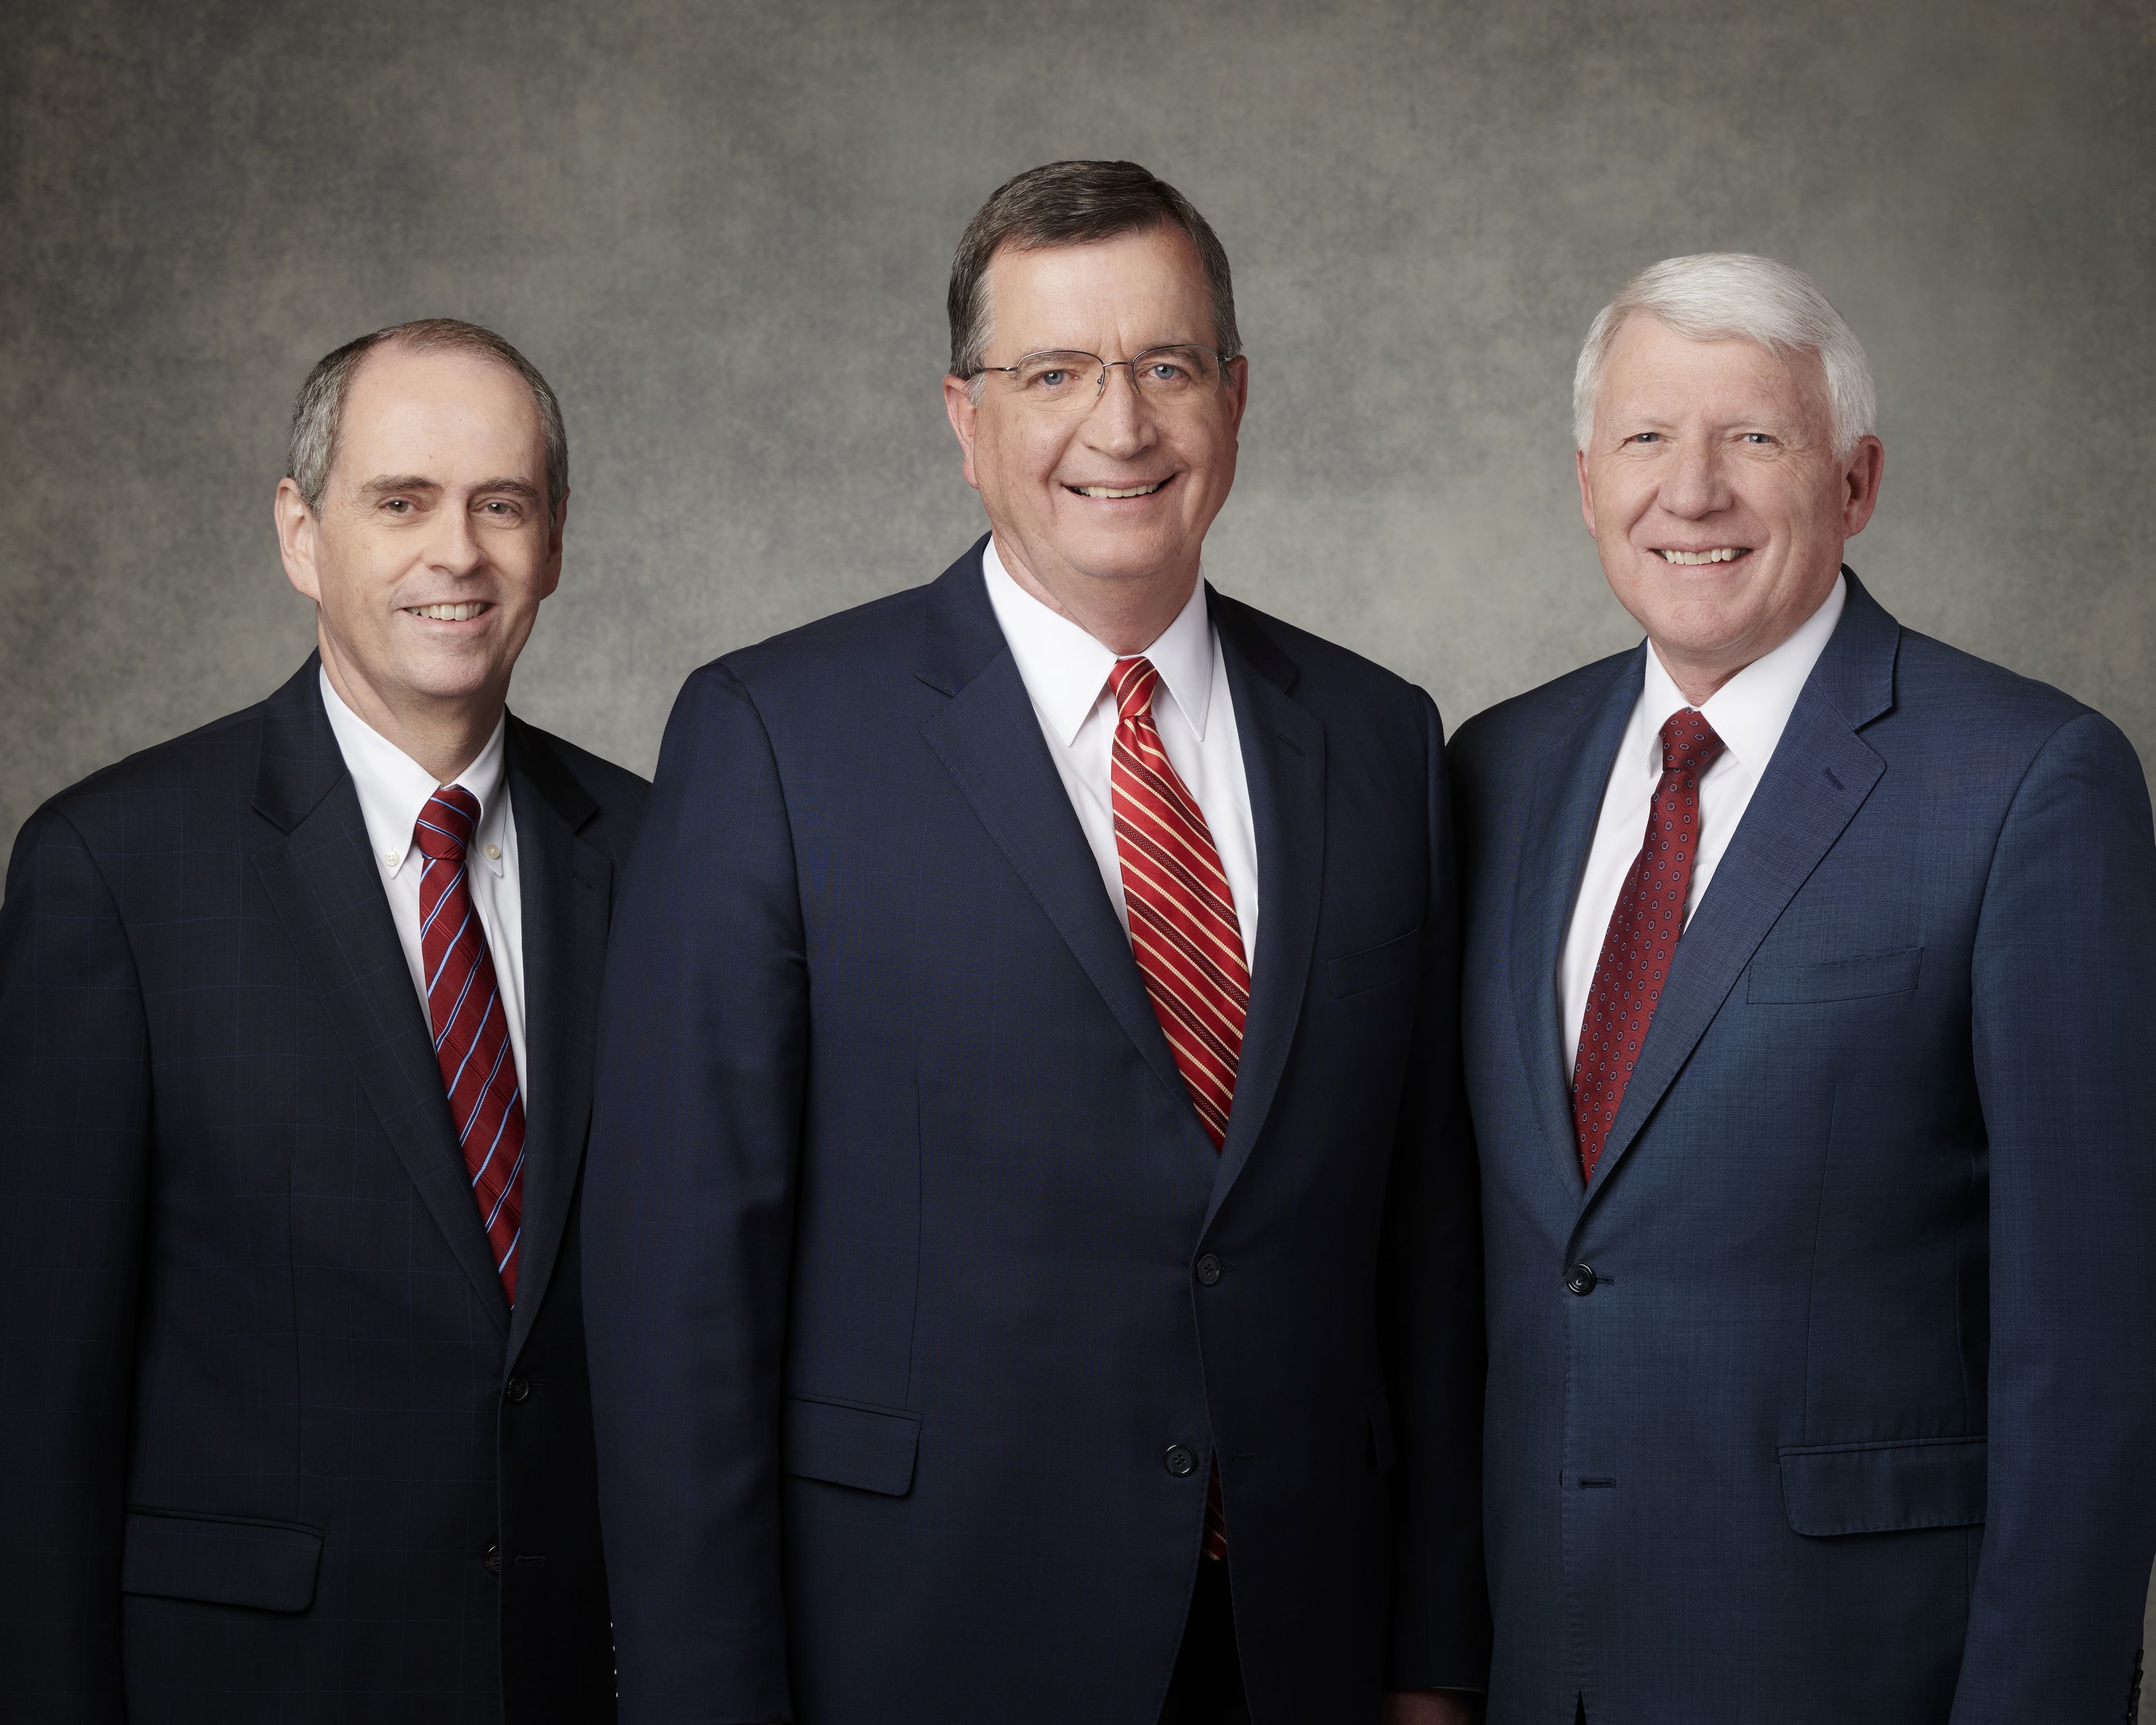 An official portrait of the Sunday School General Presidency of The Church of Jesus Christ of Latter-day Saints.